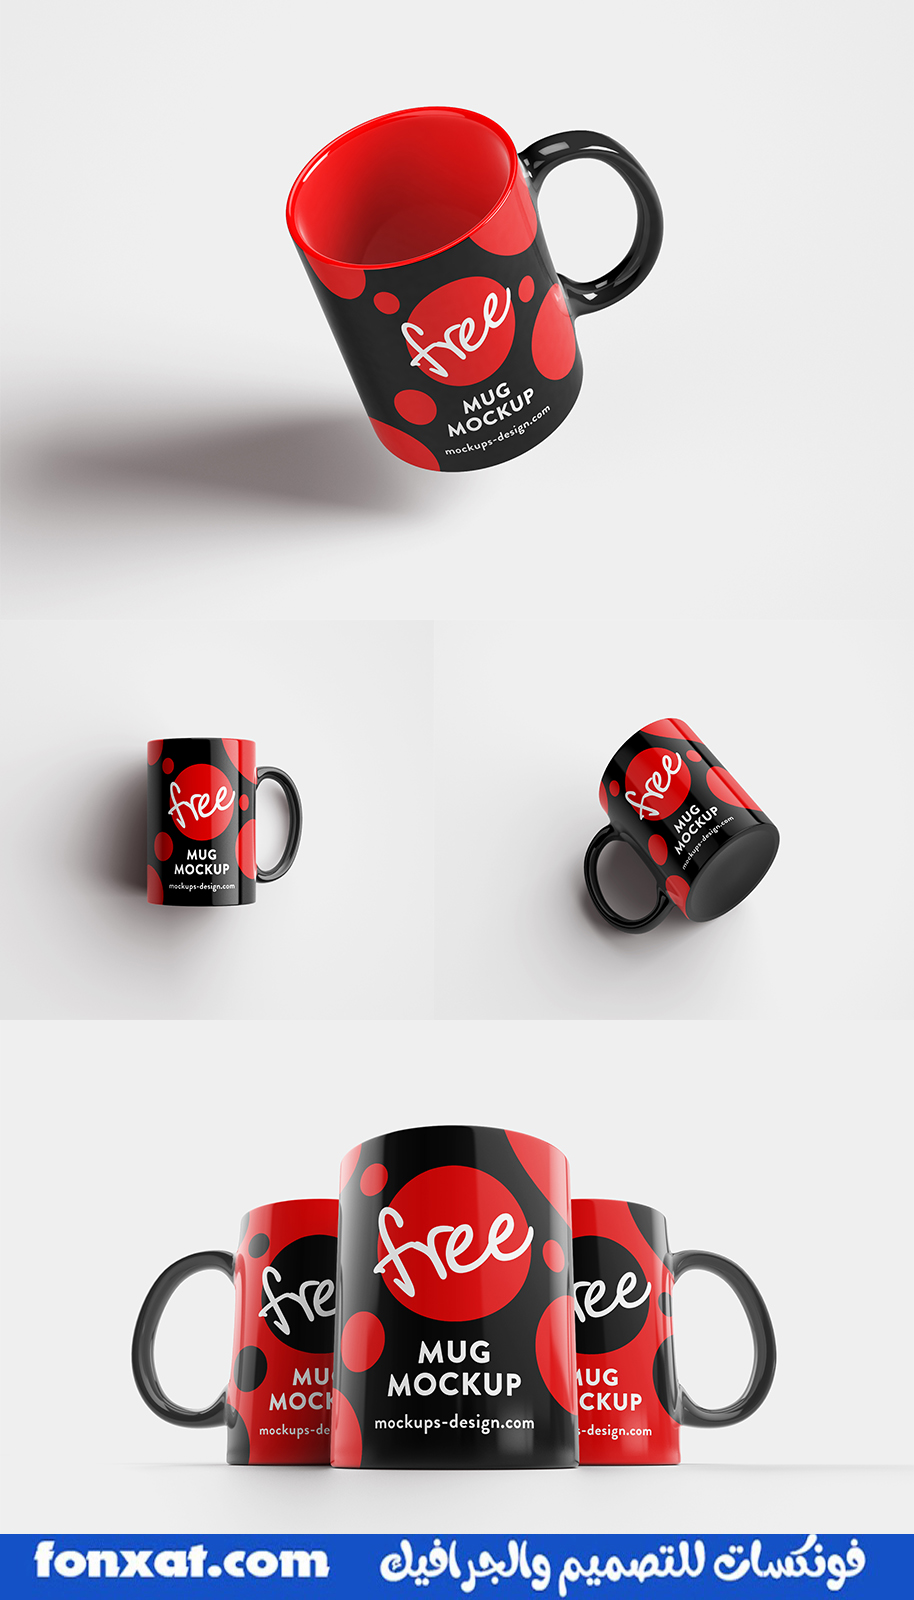 Download Mockup Mag View 4 different shapes to professionally display the designs of mugs